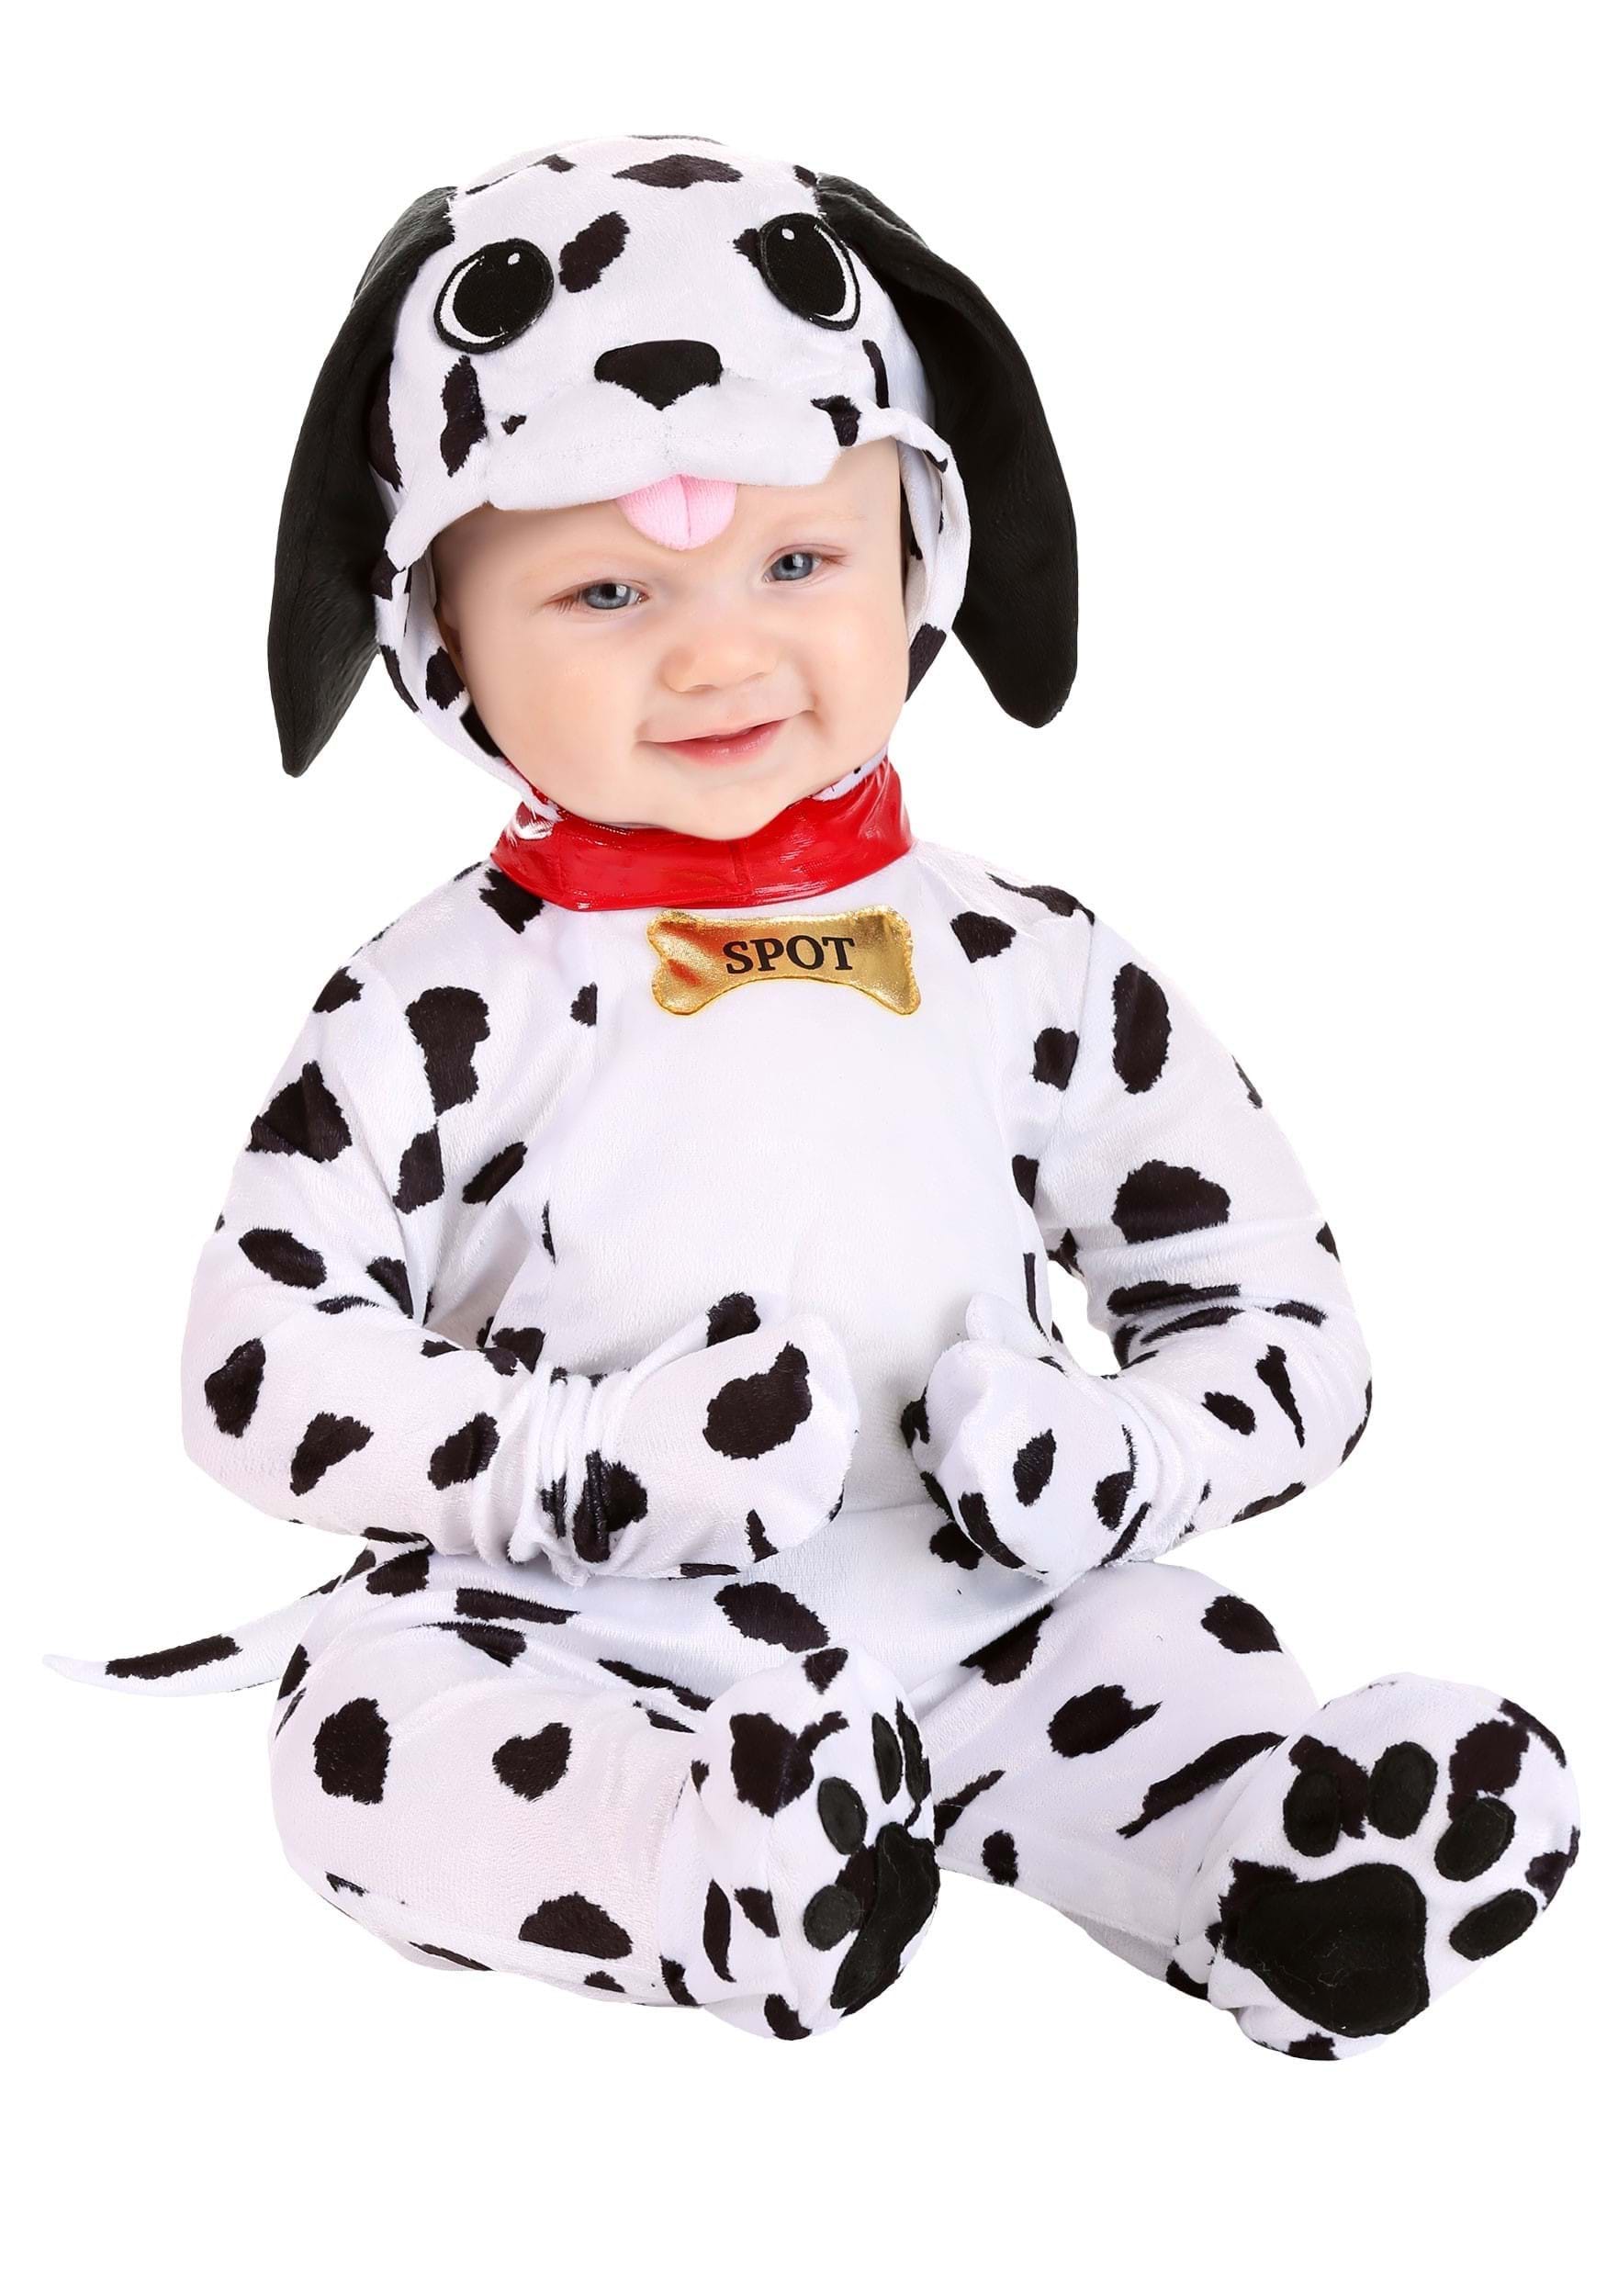 Dog Dalmatian Costume Red Collar All Over Toddler T Shirt